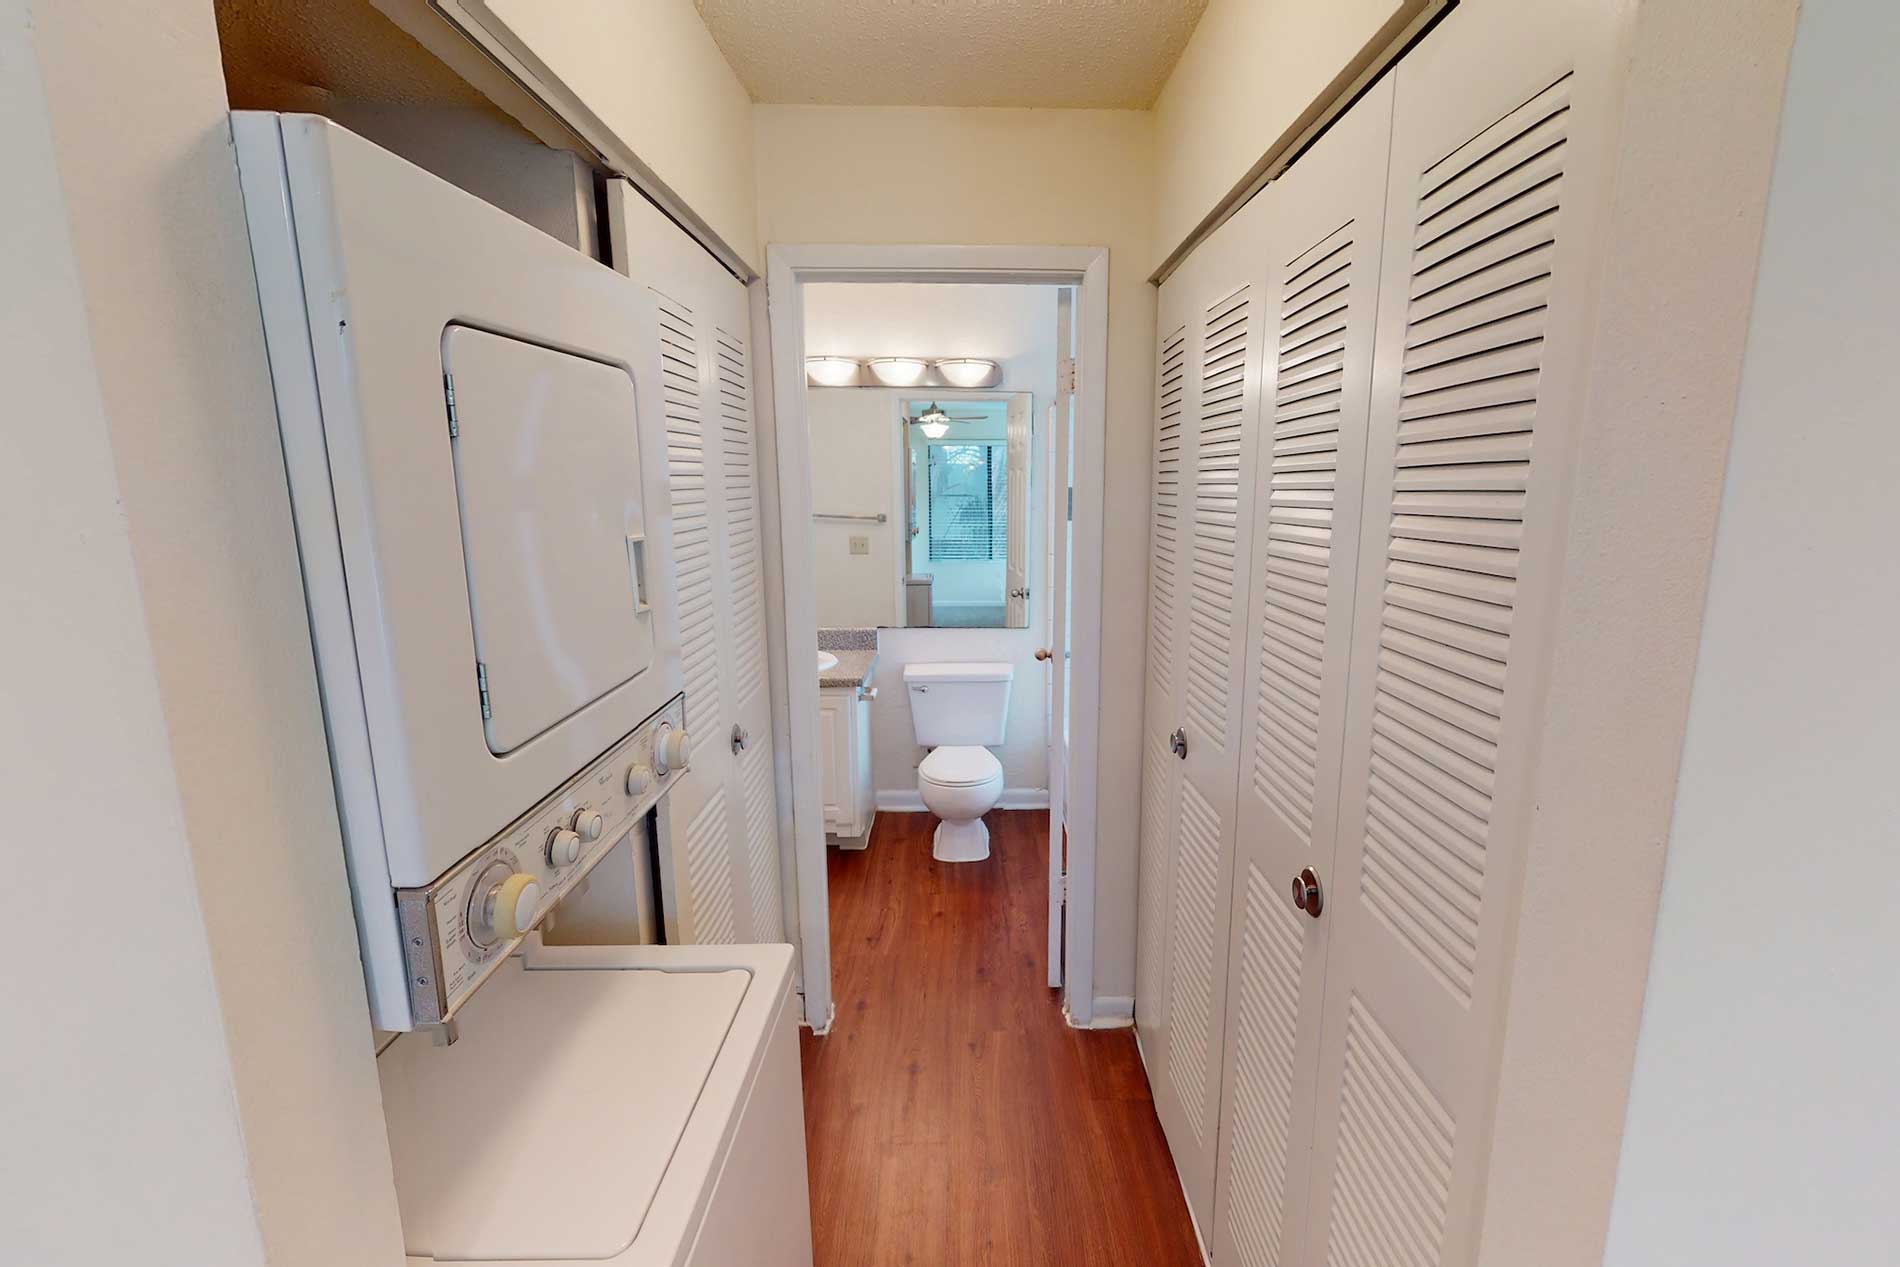 Seabrook washer and dryer with view into bathroom